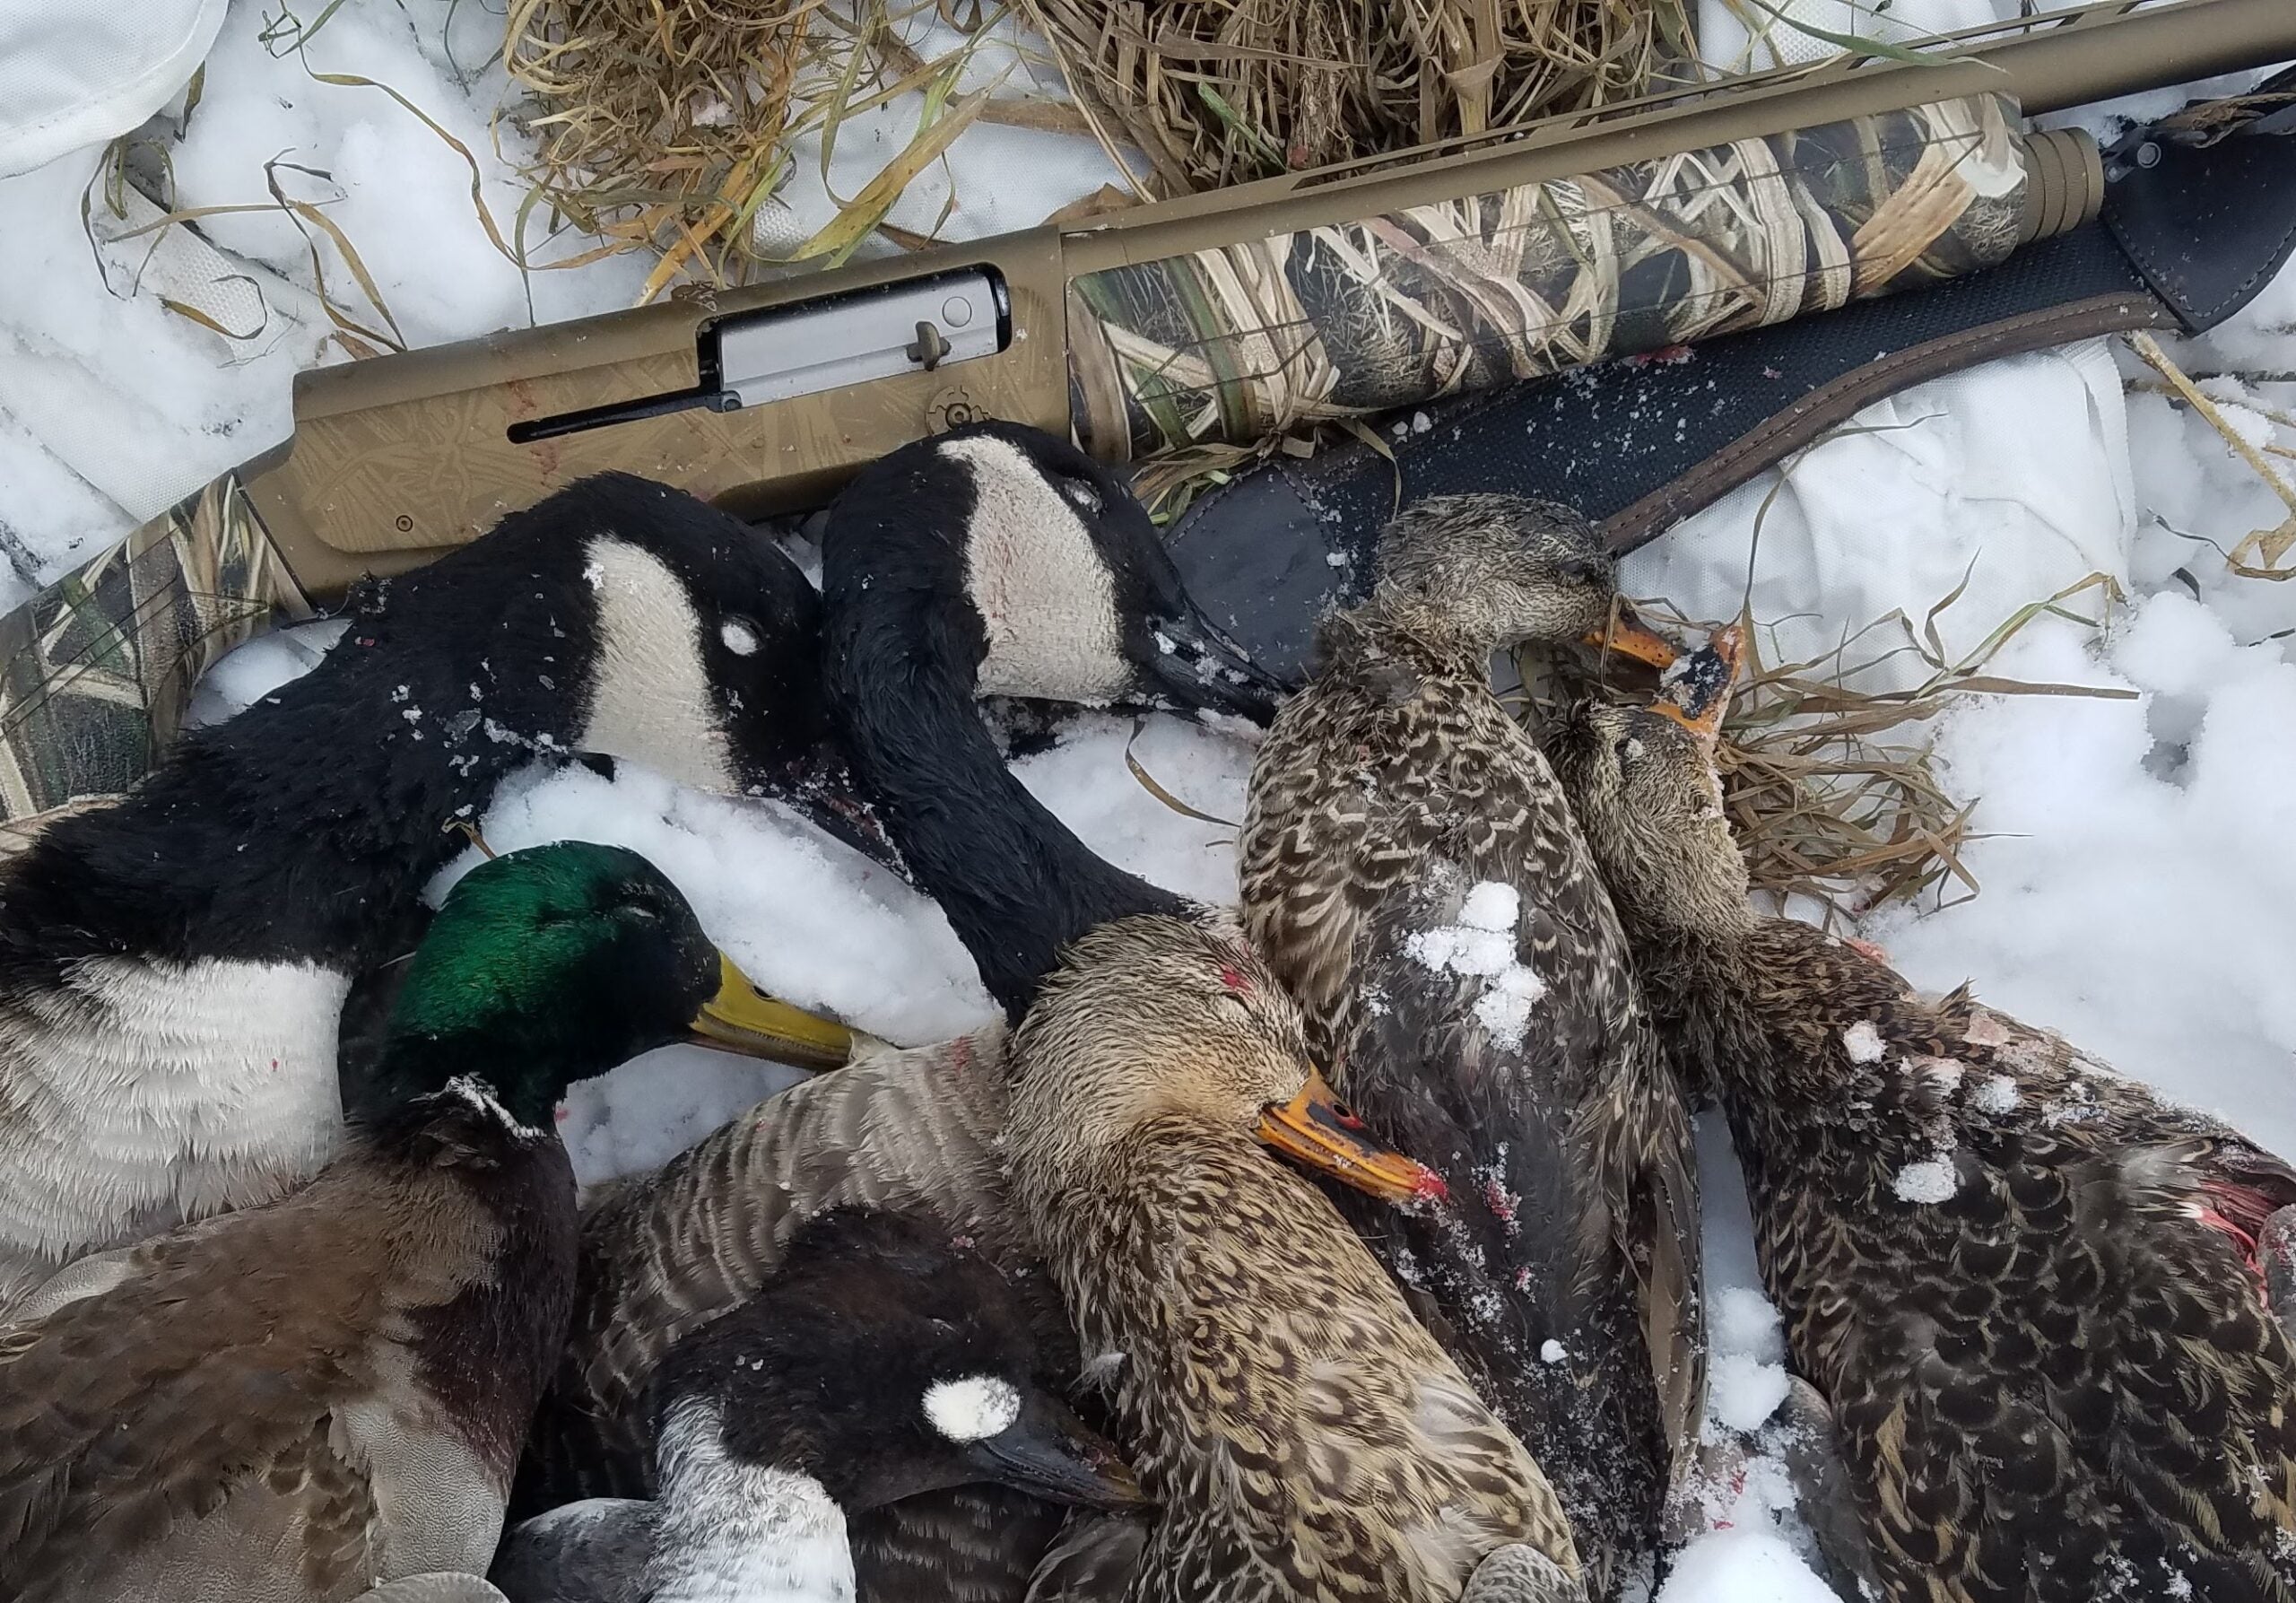 ducks and geese next to semi-automatic shotgun